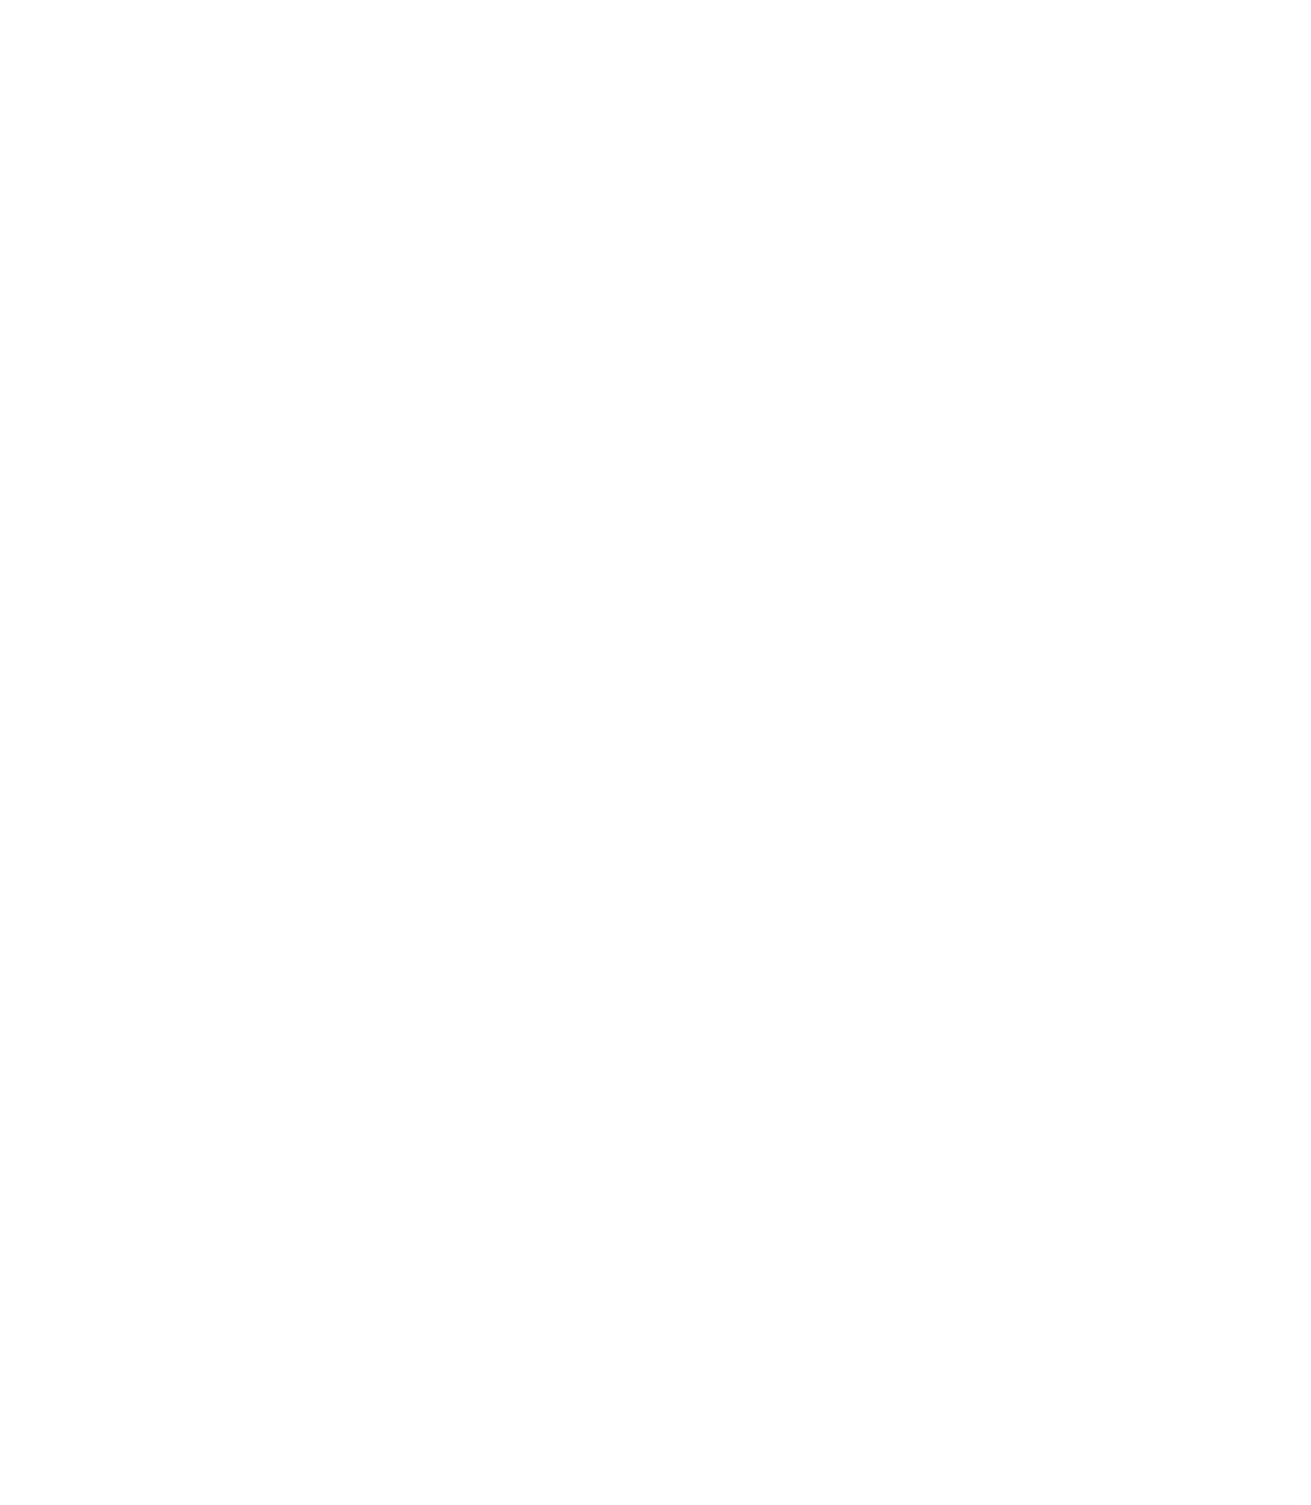 I Didn't Ask You To Dance, I Said You Look Fat In Those Pants.